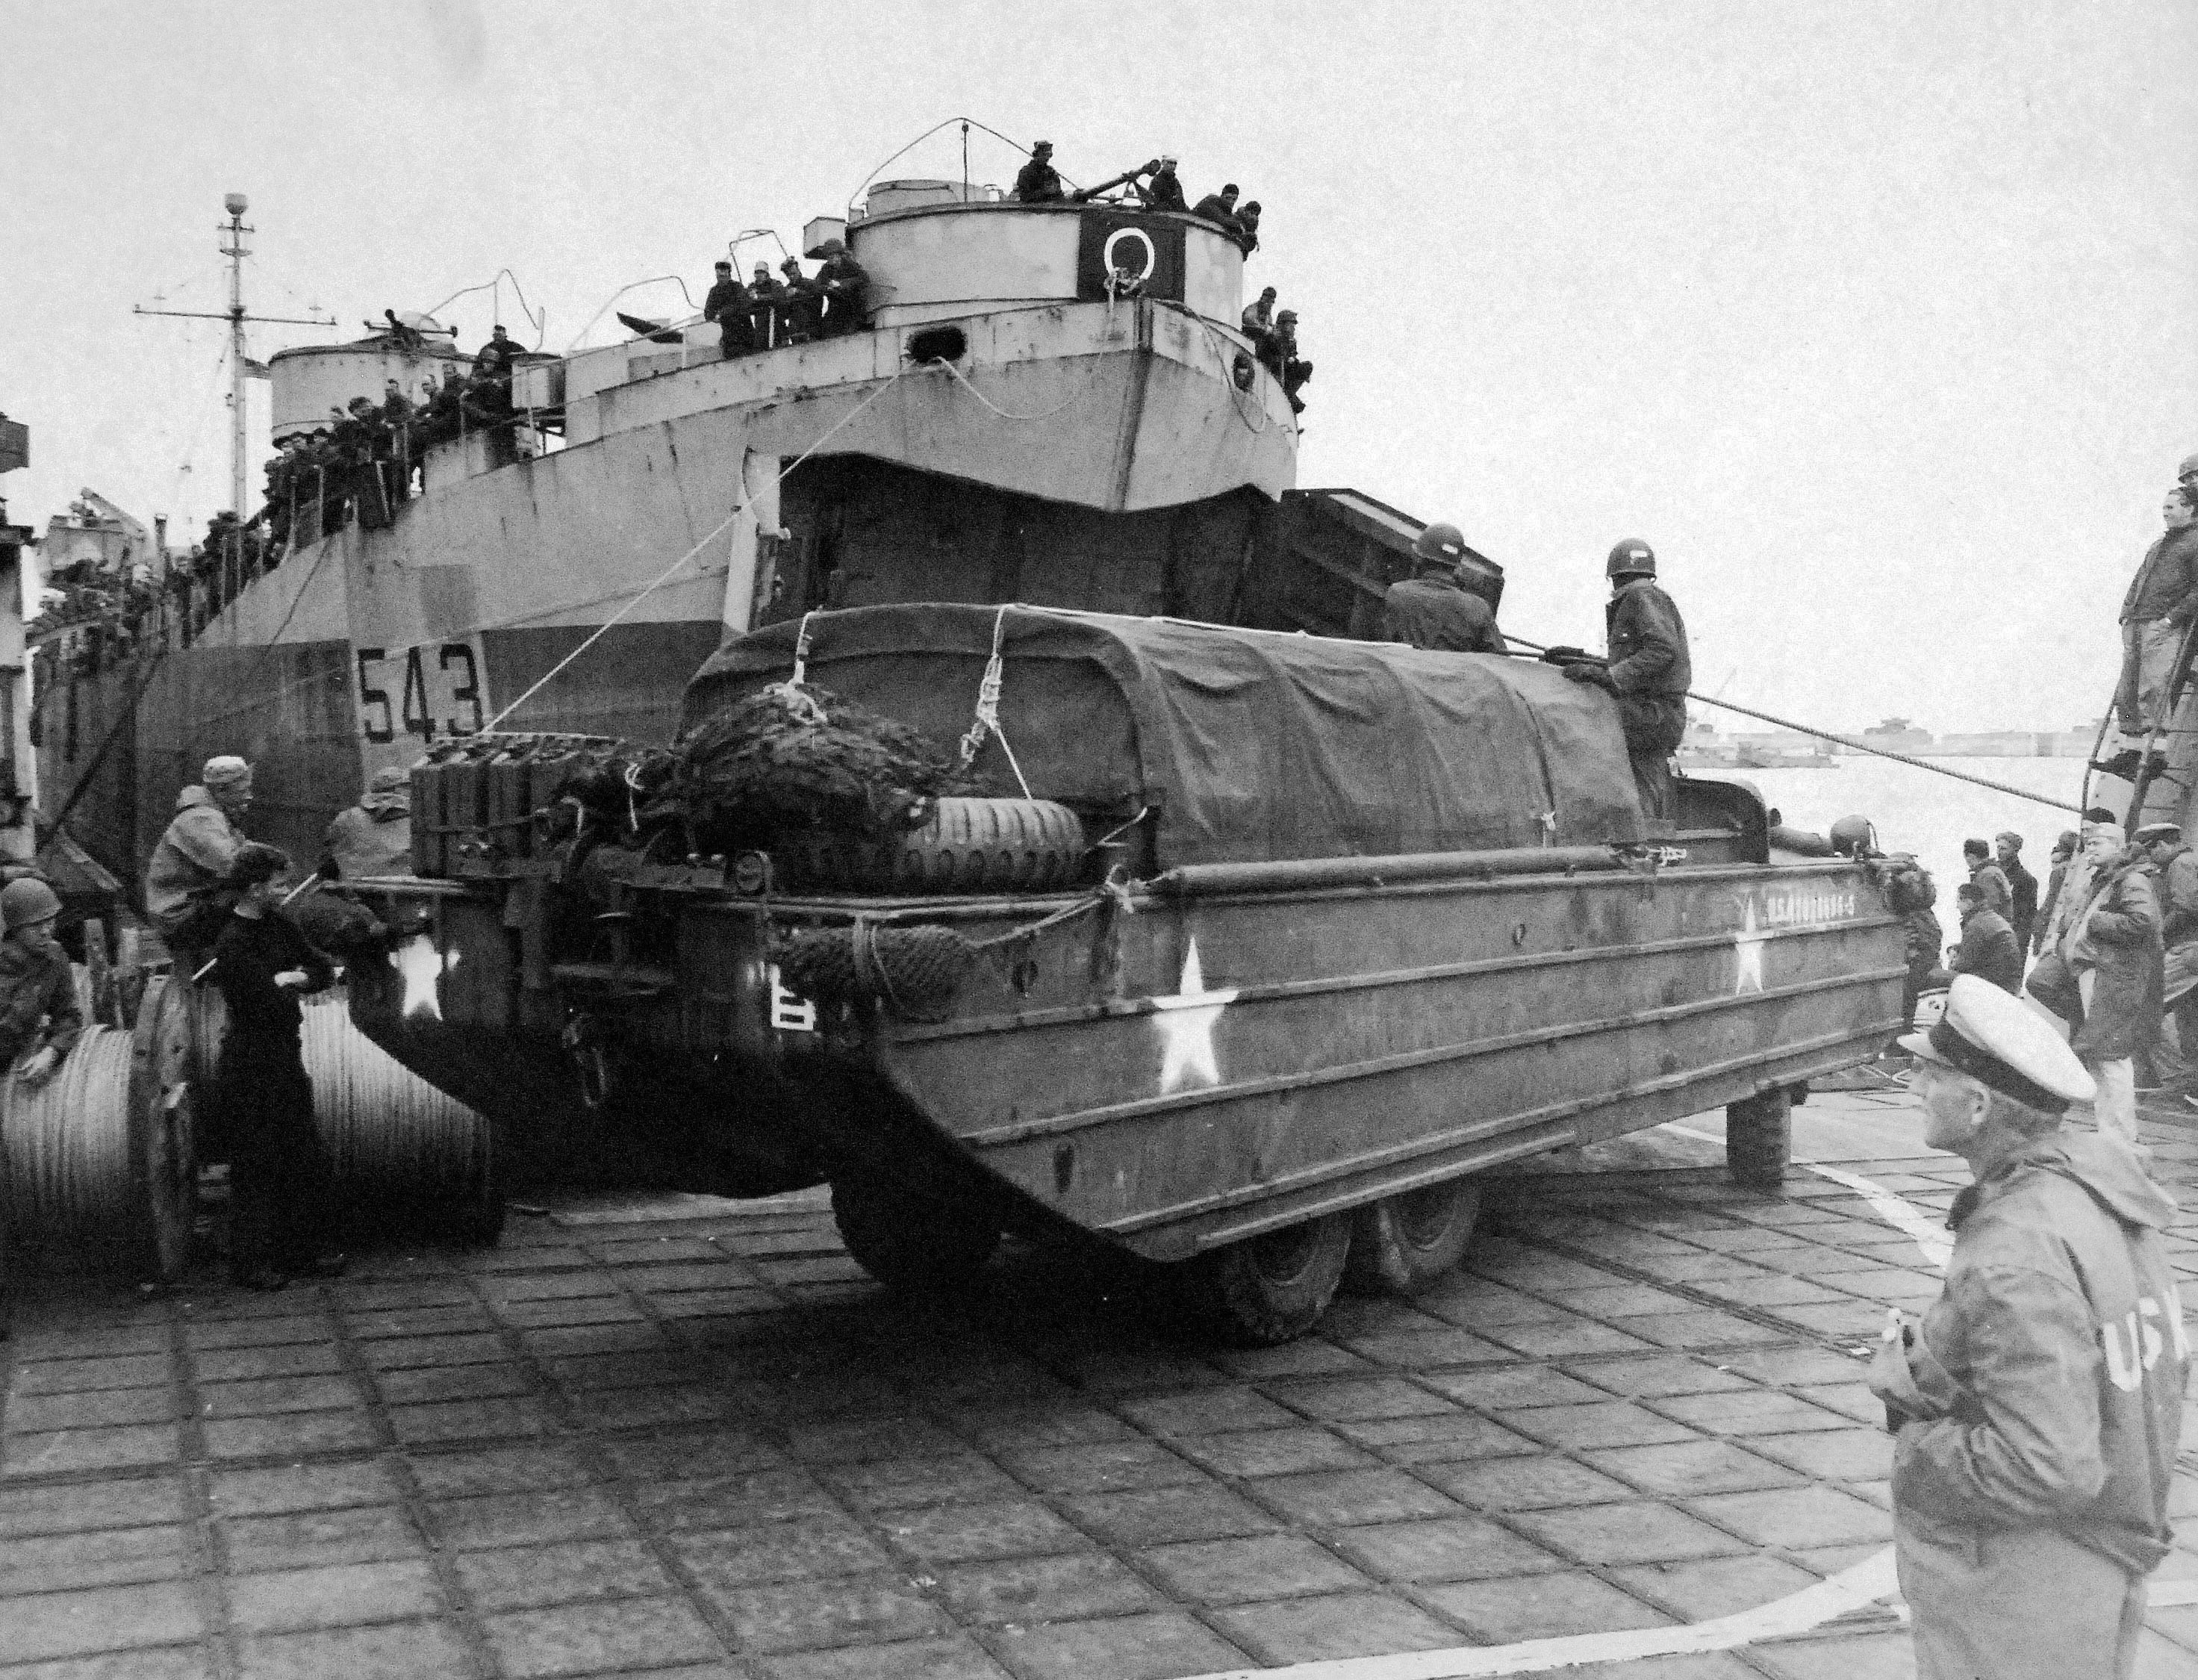 DUKW loaded with supplies for supplying the Normandy beachhead boarding LST-543, England, United Kingdom, Jun 1944, photo 2 of 2